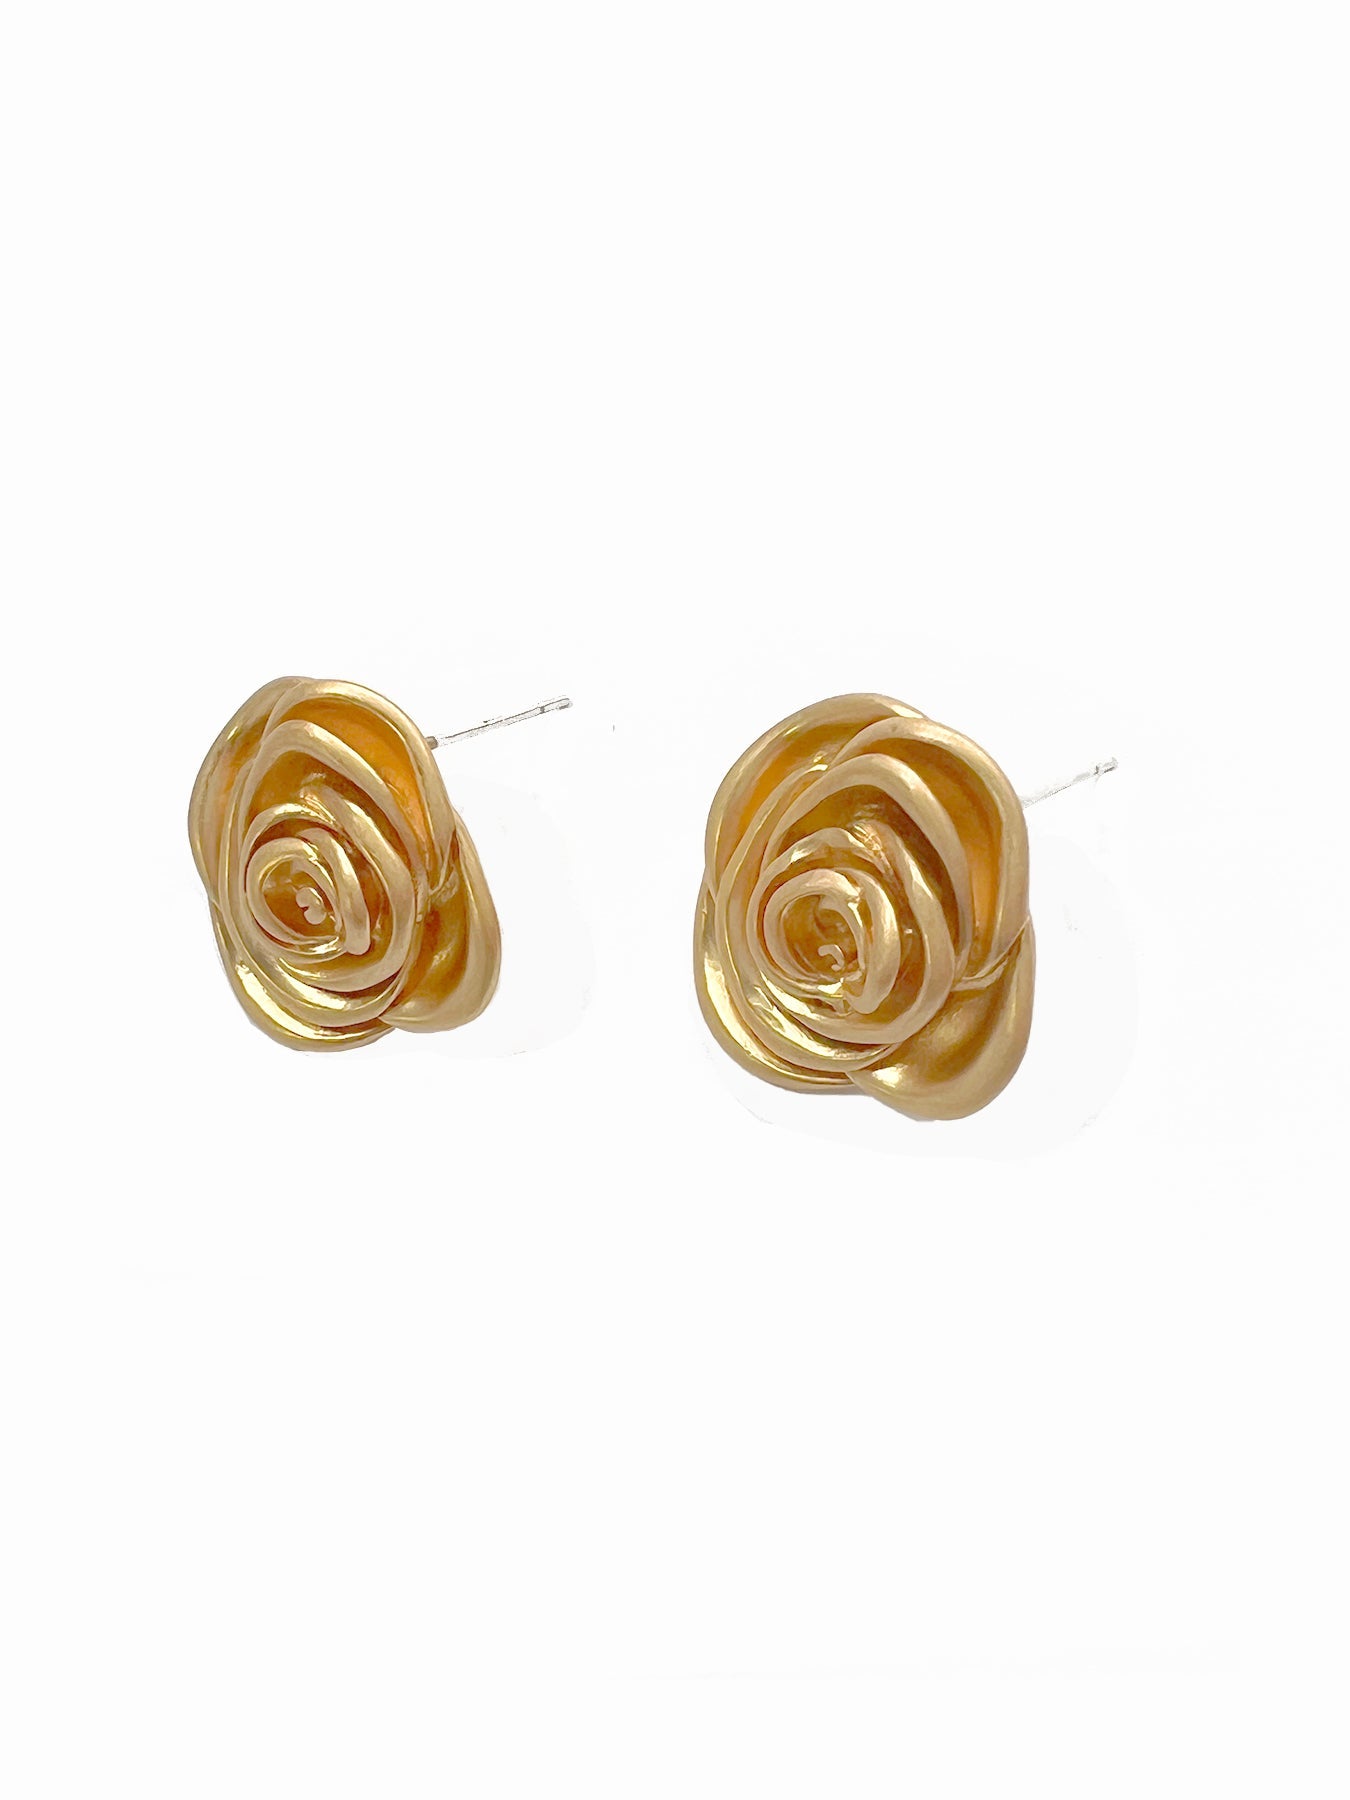 Rose Bloom Earrings - Lesley Evers-Accessories-accessory-Shop